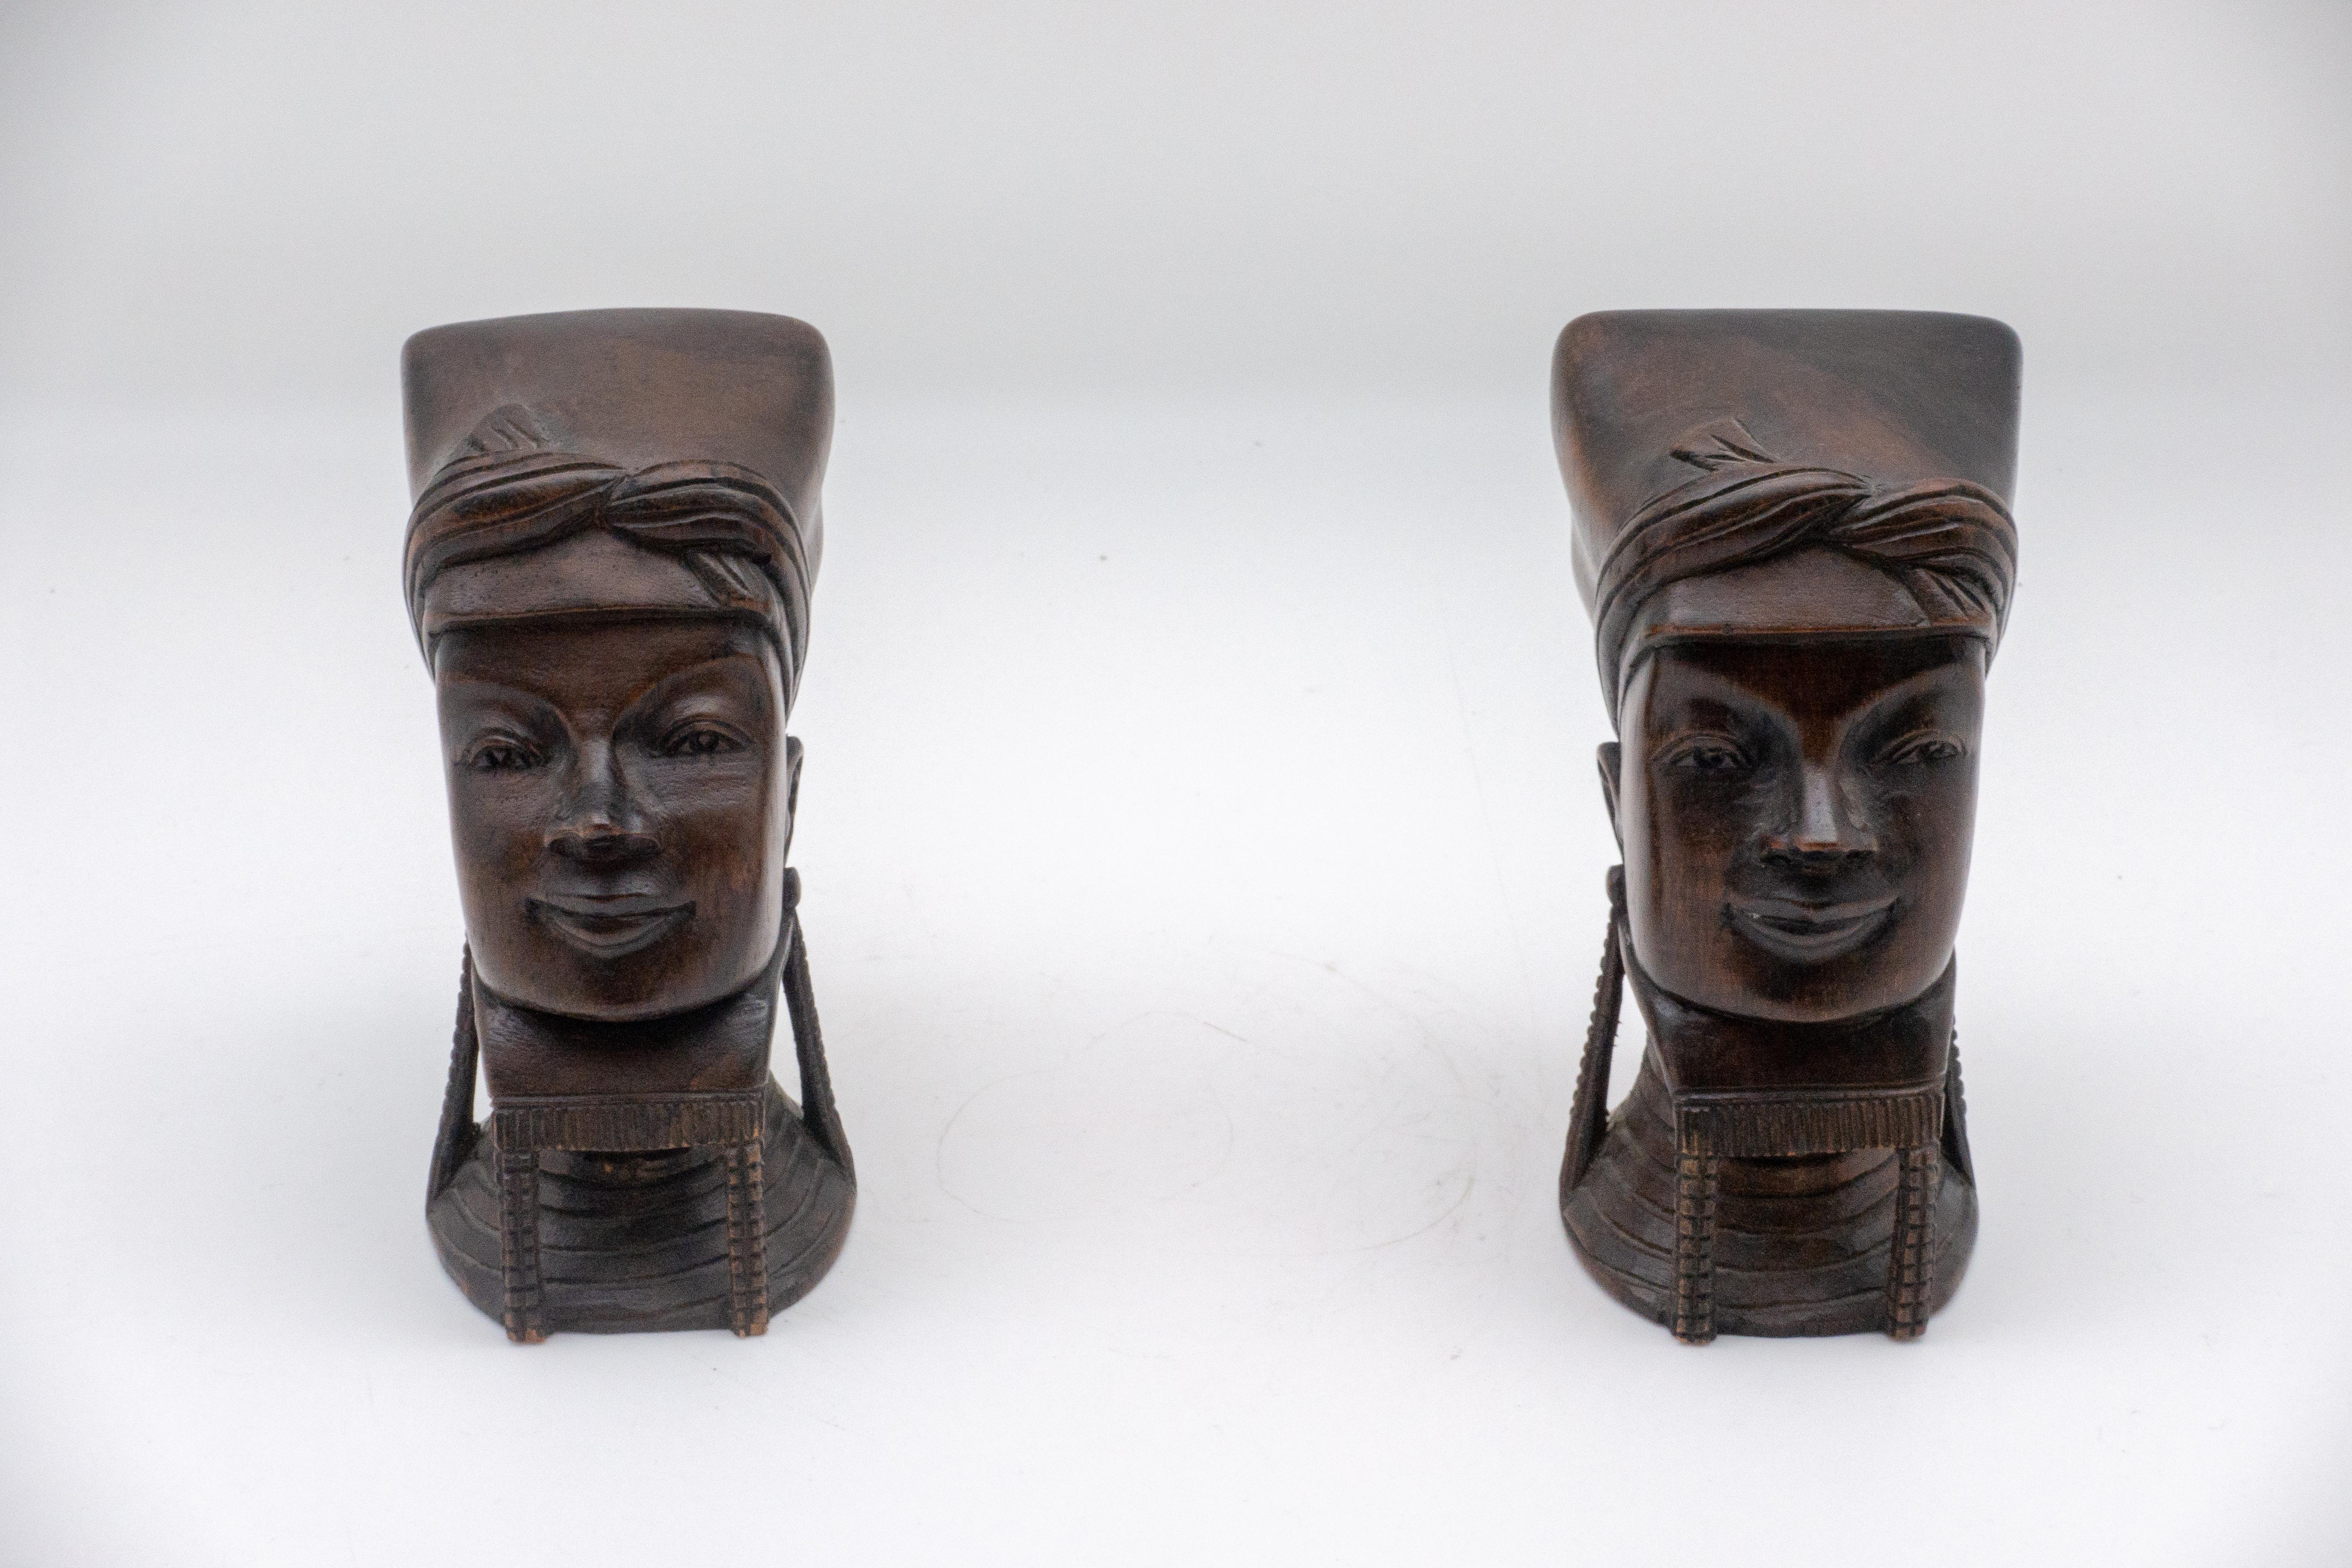 Wooden bookends/busts in the likeness of Myanma (Burmese) women, wearing traditional head covering and brass neck coils.